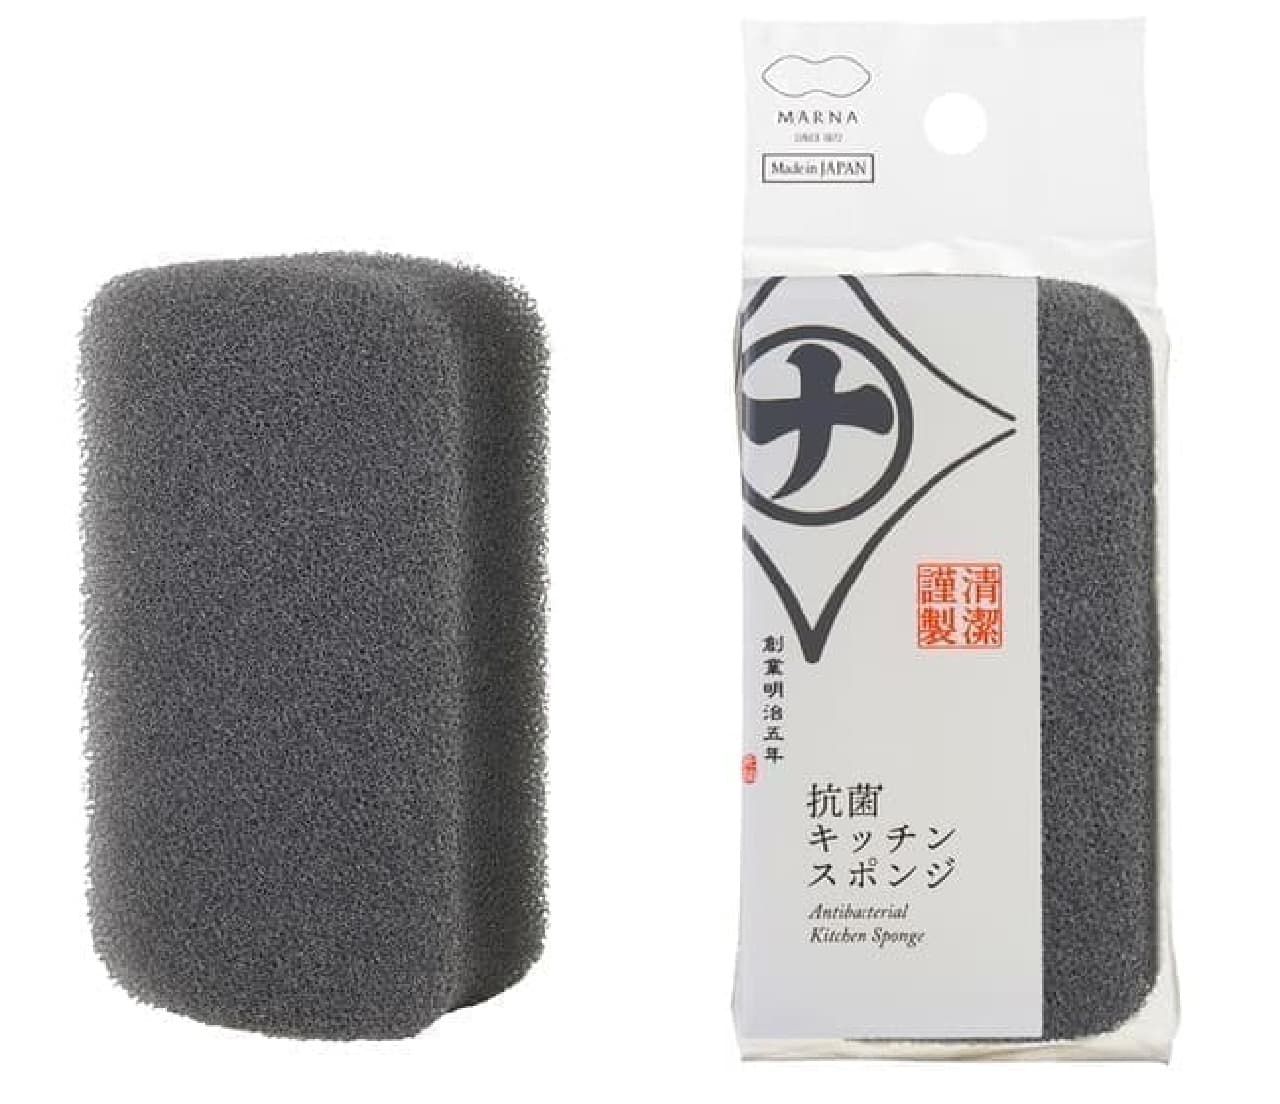 Mana "Antibacterial Kitchen Sponge" New Color Gray Appears --Features good foaming and drainage